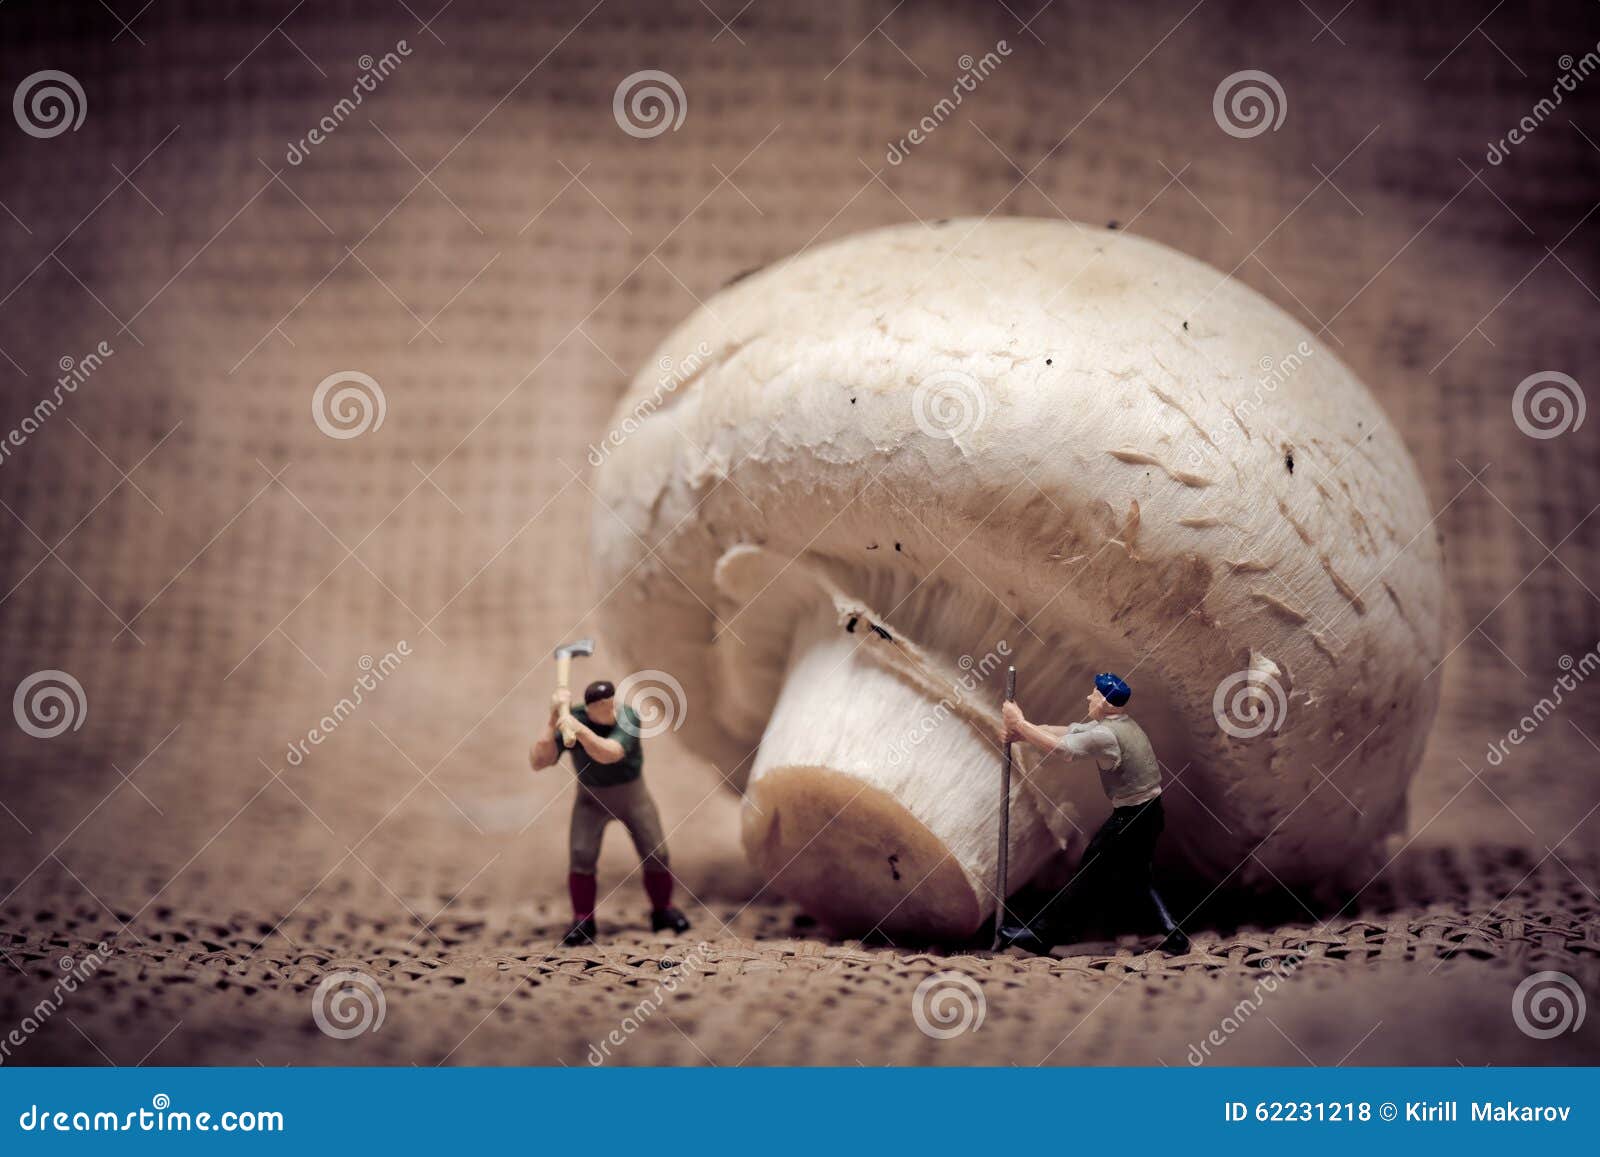 miniature workers cutting down gian mushroom. food concept. color tone tuned